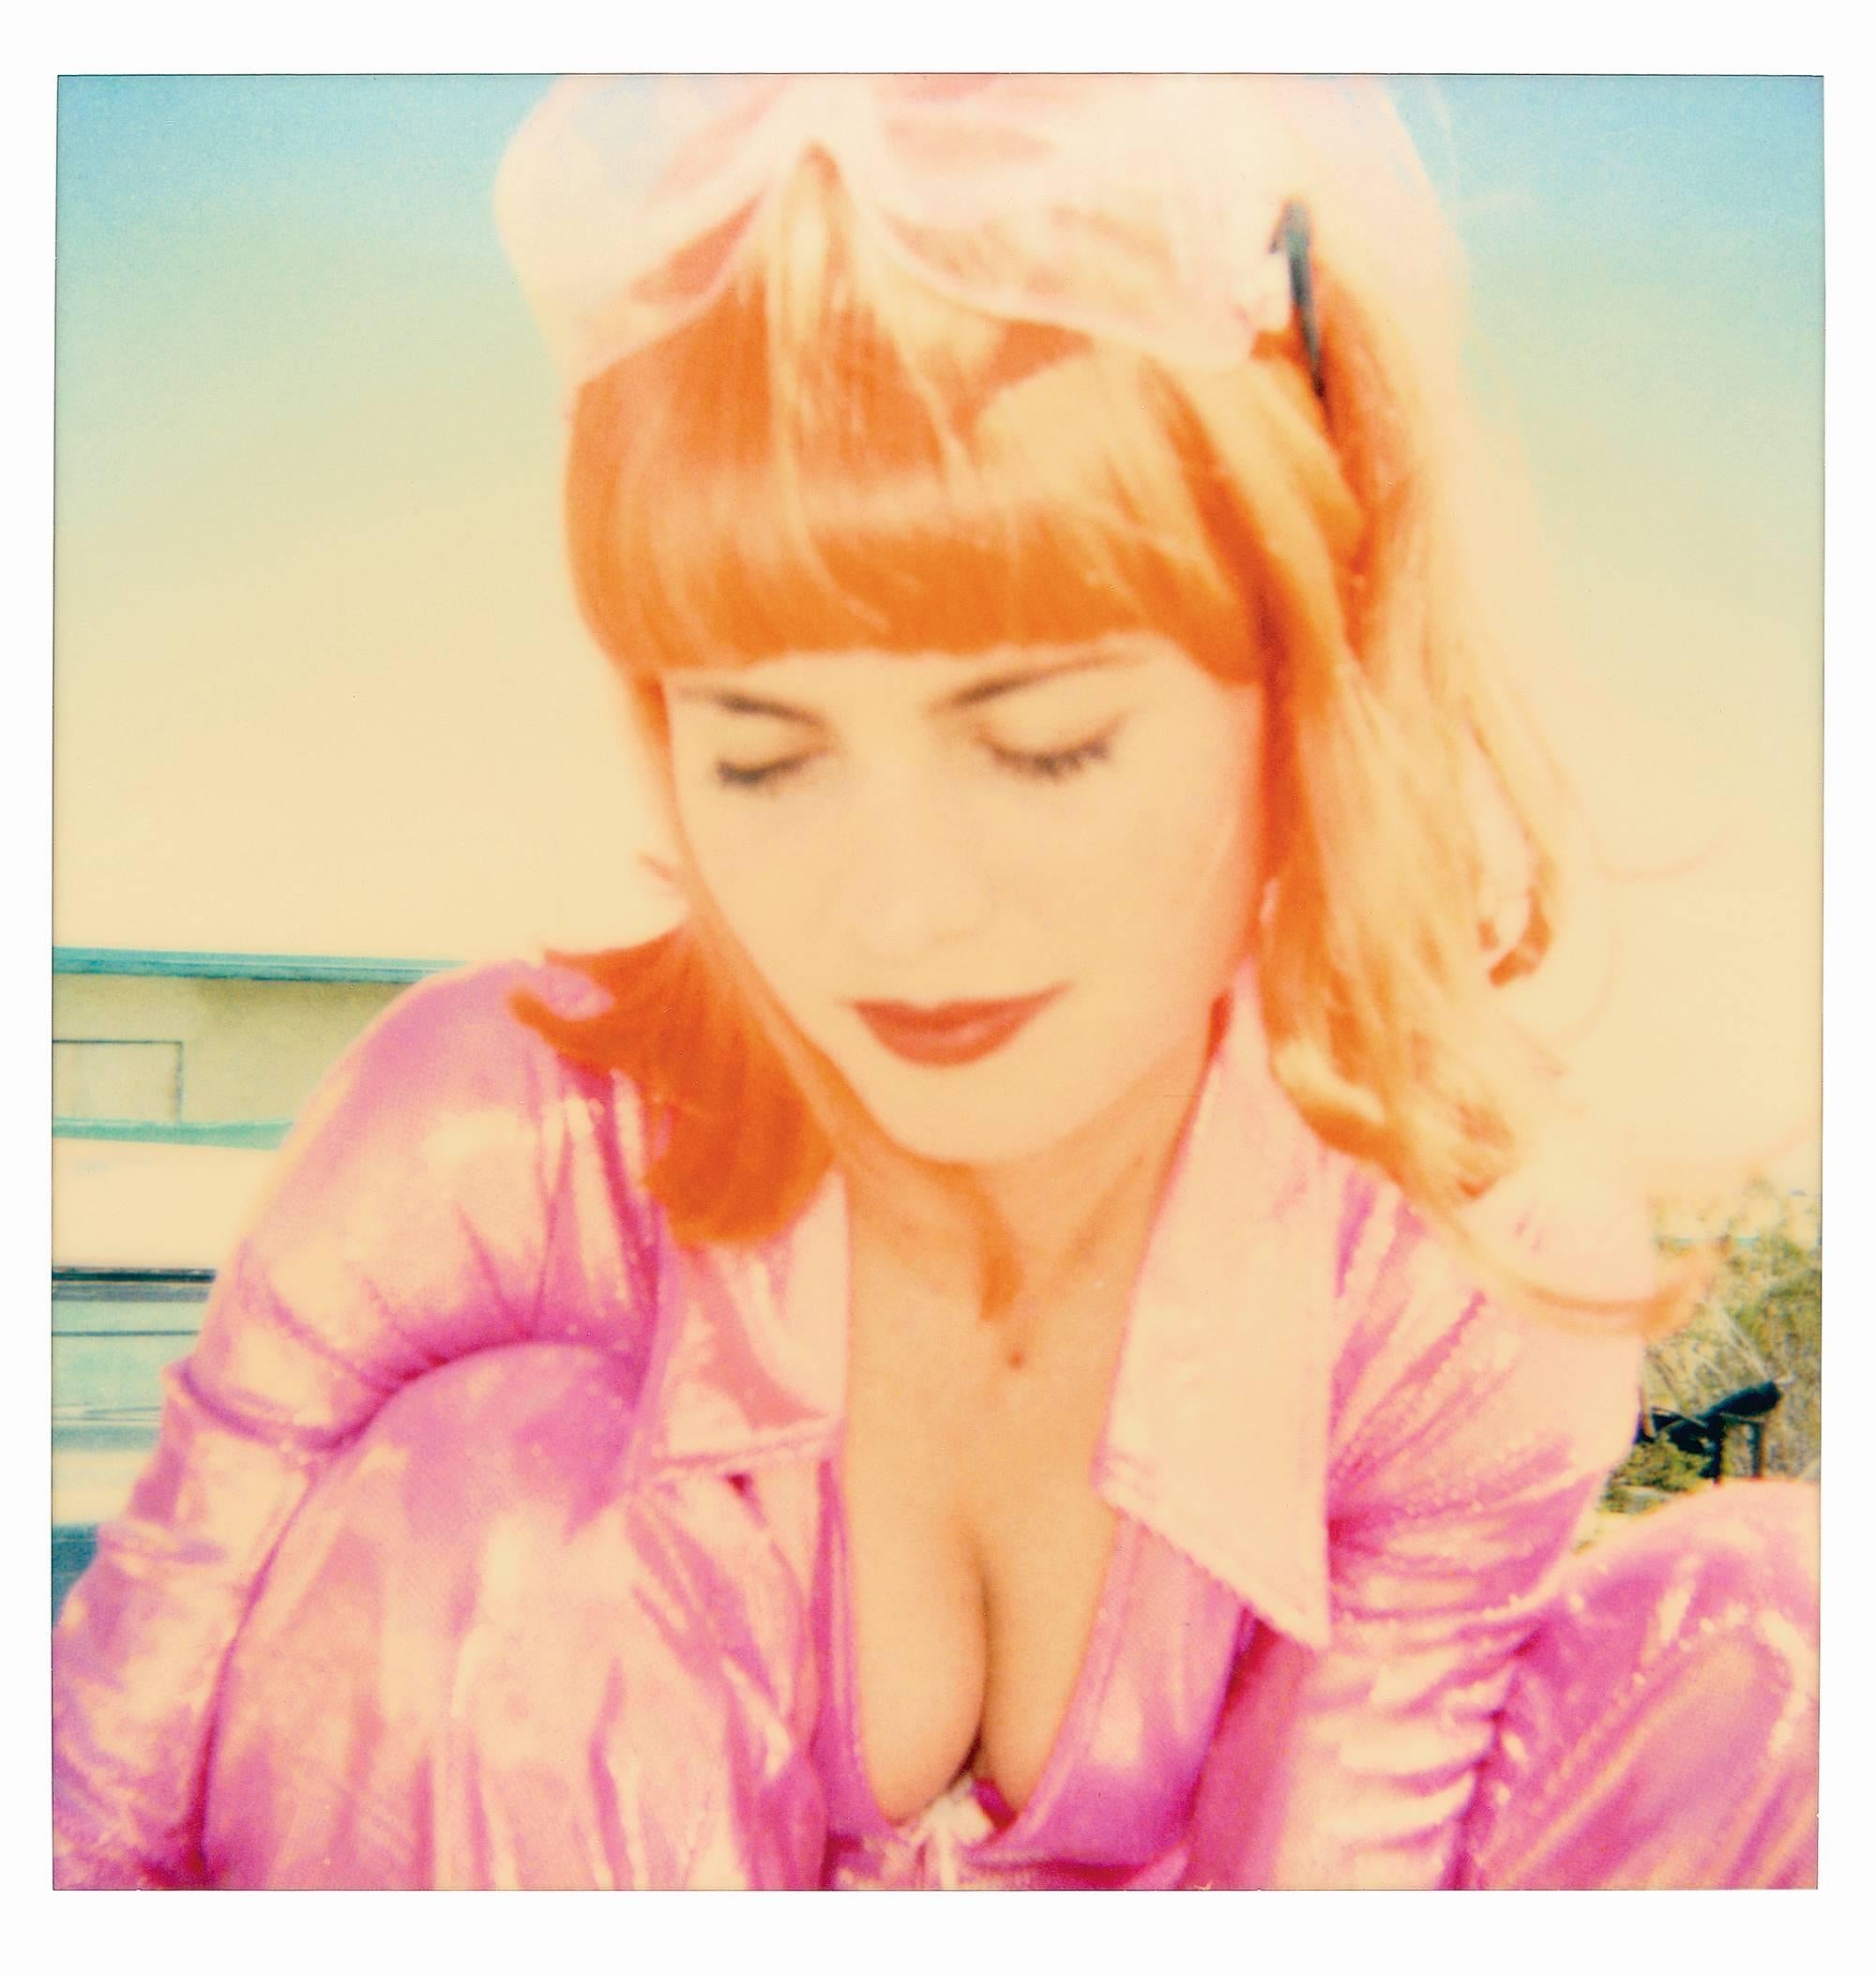 Radha Pink (29 Palms, CA), 1999, 
20x20cm, sold out Edition of 5, Artist Proof 2/2, 
digital C-Print print, based on a Polaroid, 
Certificate and Signature label, artist Inventory Nr. 616.39, 
not mounted. 

Featuring Radha Mitchell.

Publications: